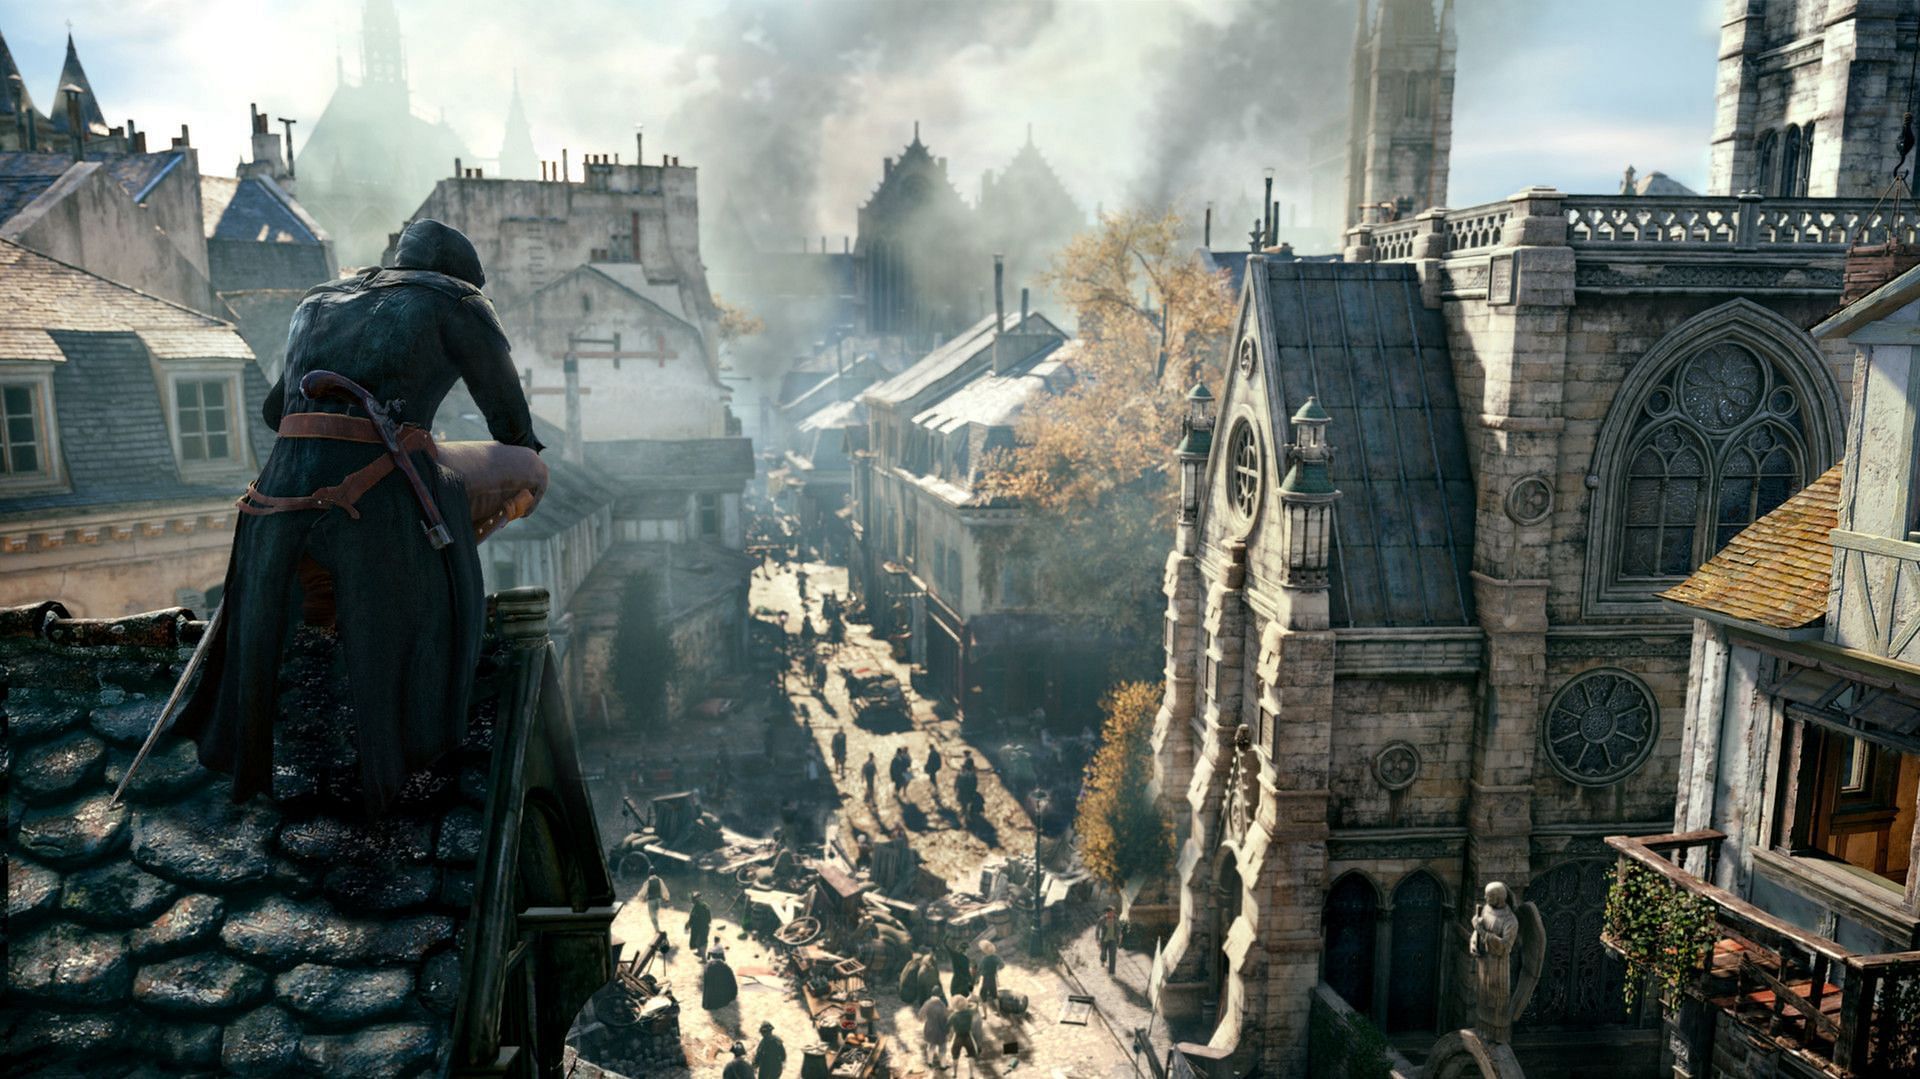 Unity is one of the best open world games in this franchise (Image via Ubisoft)